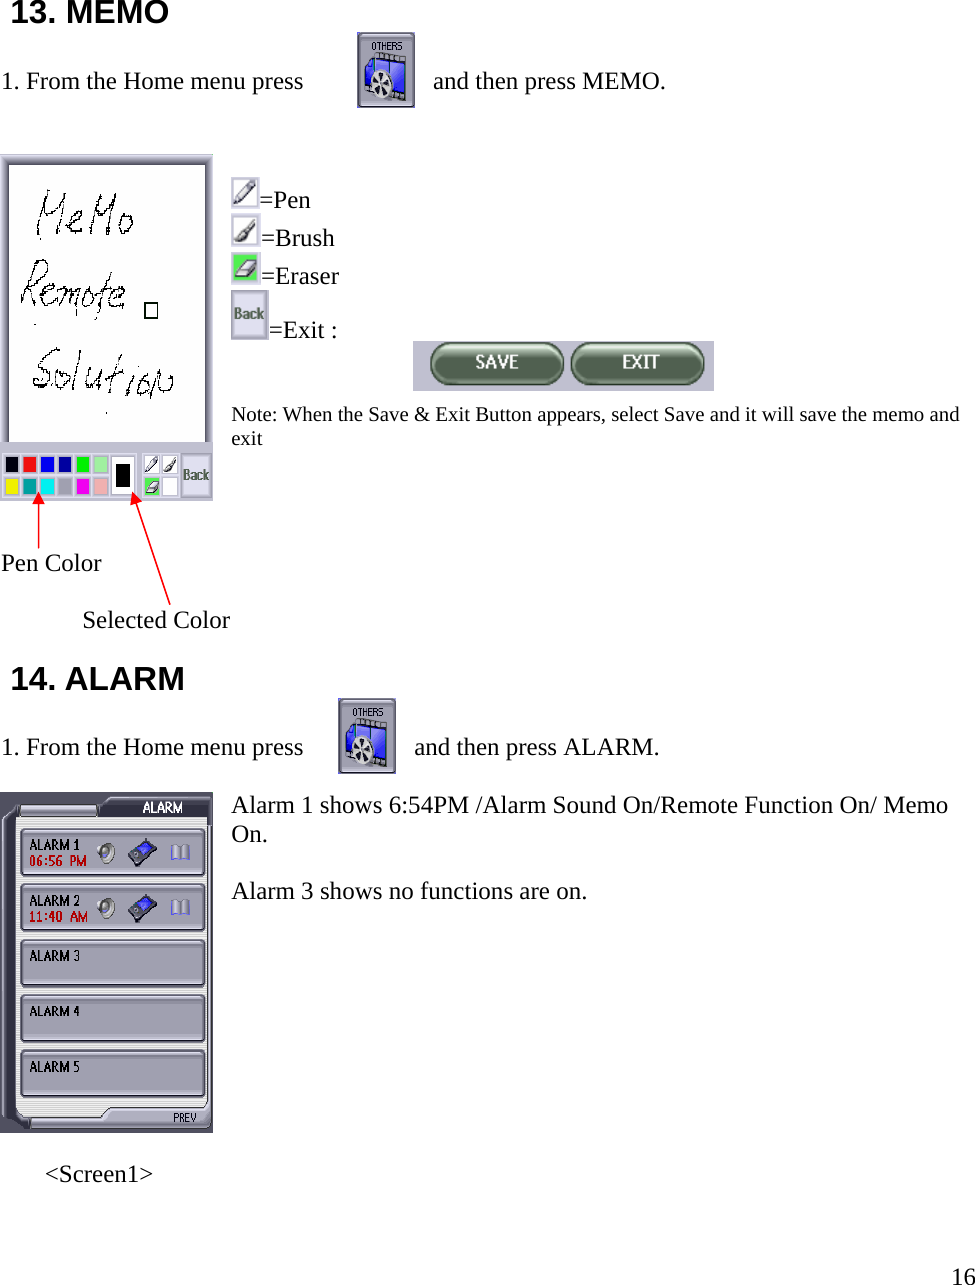    1 3. MEMO . From the Home menu press                and then press MEMO.  =Eraser :    e Save &amp; Exit Button appears, select Save and it will save the memo and  r 14. ALARM . From the Home menu press                and then press ALARM. Alarm 1 shows 6:54PM /Alarm Sound On/Remote Function On/ Memo n.  1=Pen =Brush =Exit  Note: When th  exit Pen Color               Selected Colo    1 OAlarm 3 shows no functions are on.             &lt;Screen1&gt;  16